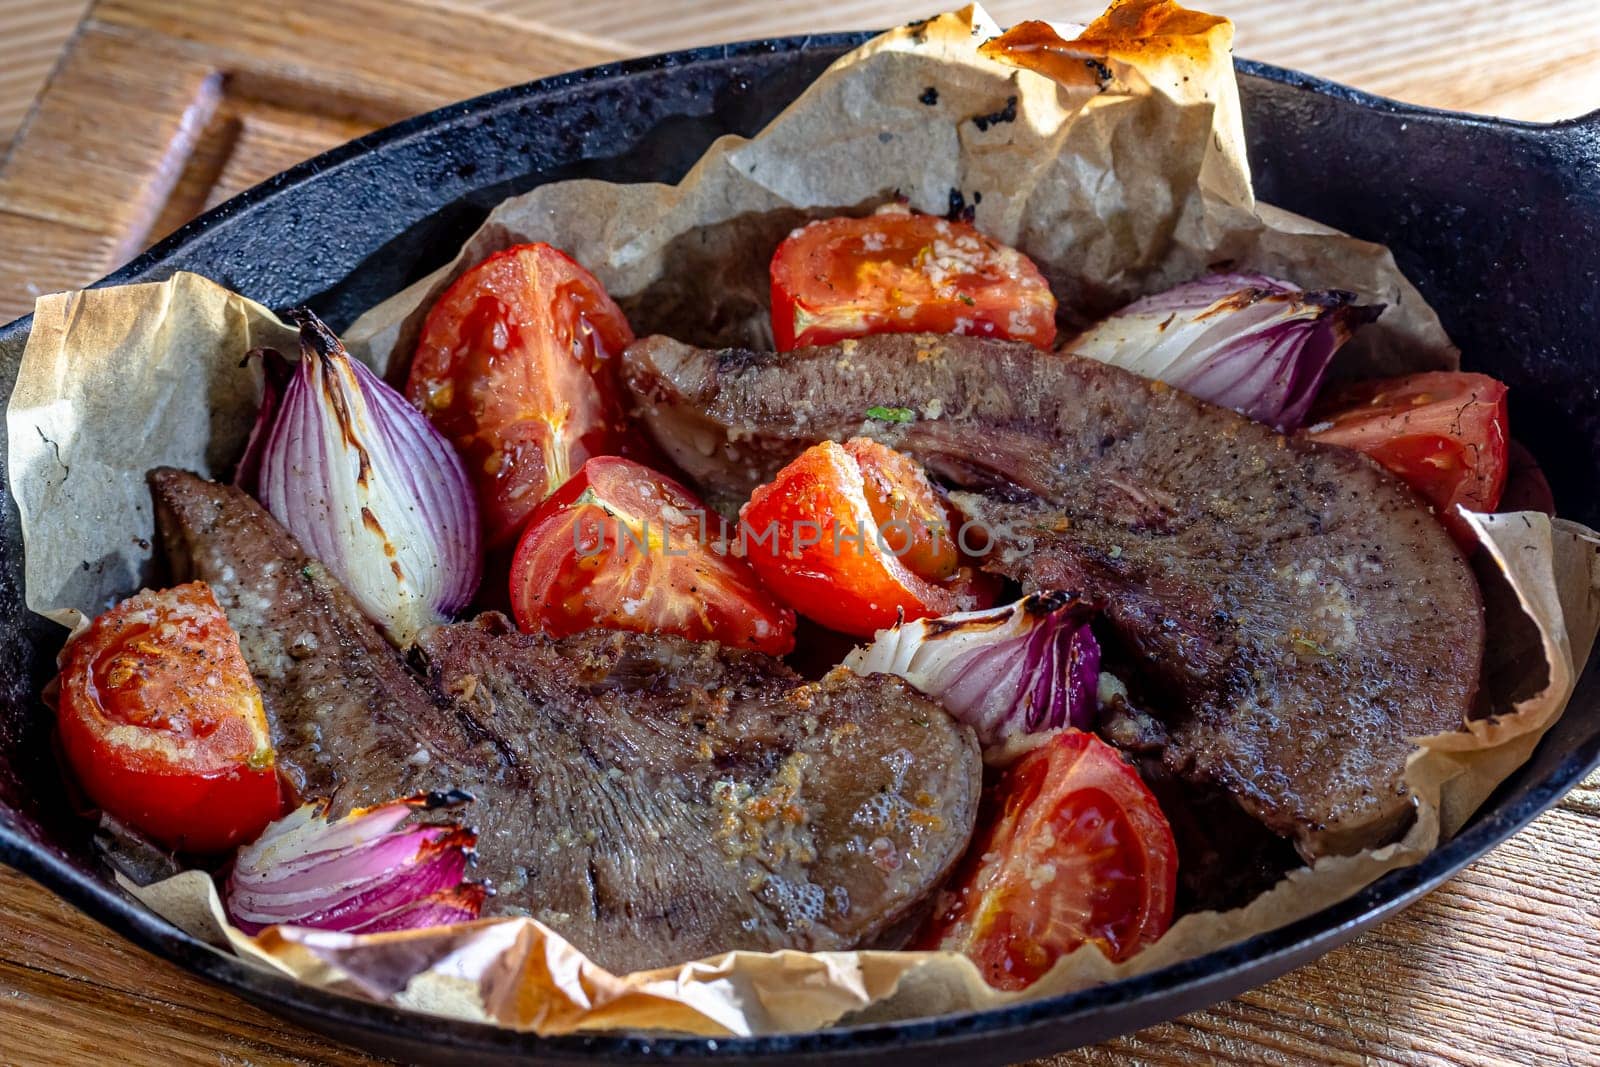 Beef tongue baked in a cast-iron pan with vegetables.